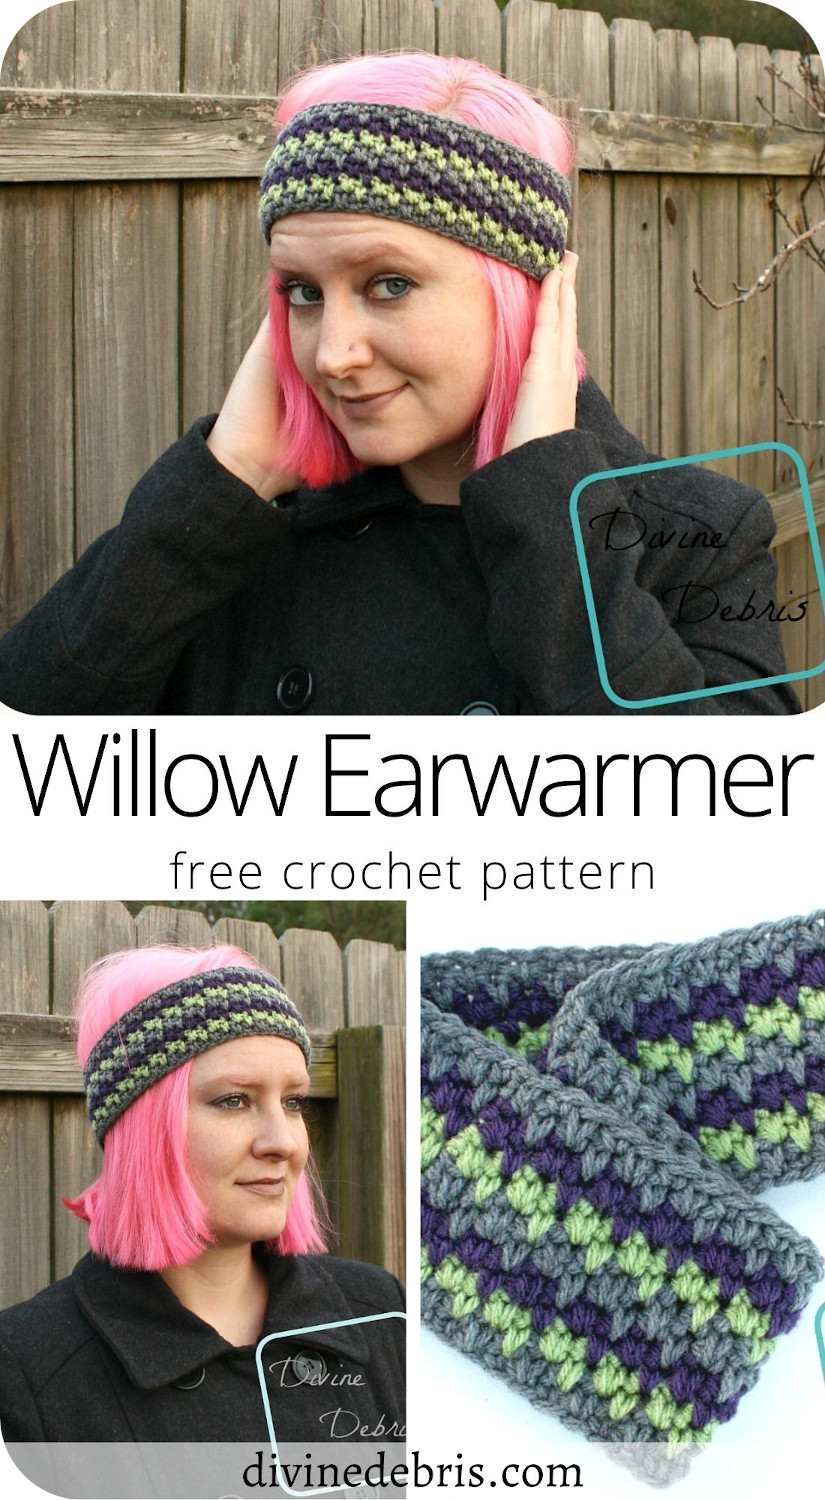 Make this warm and fun headband from a simple combination of stitches, the Willow Earwarmer free crochet pattern by Divine Debris.